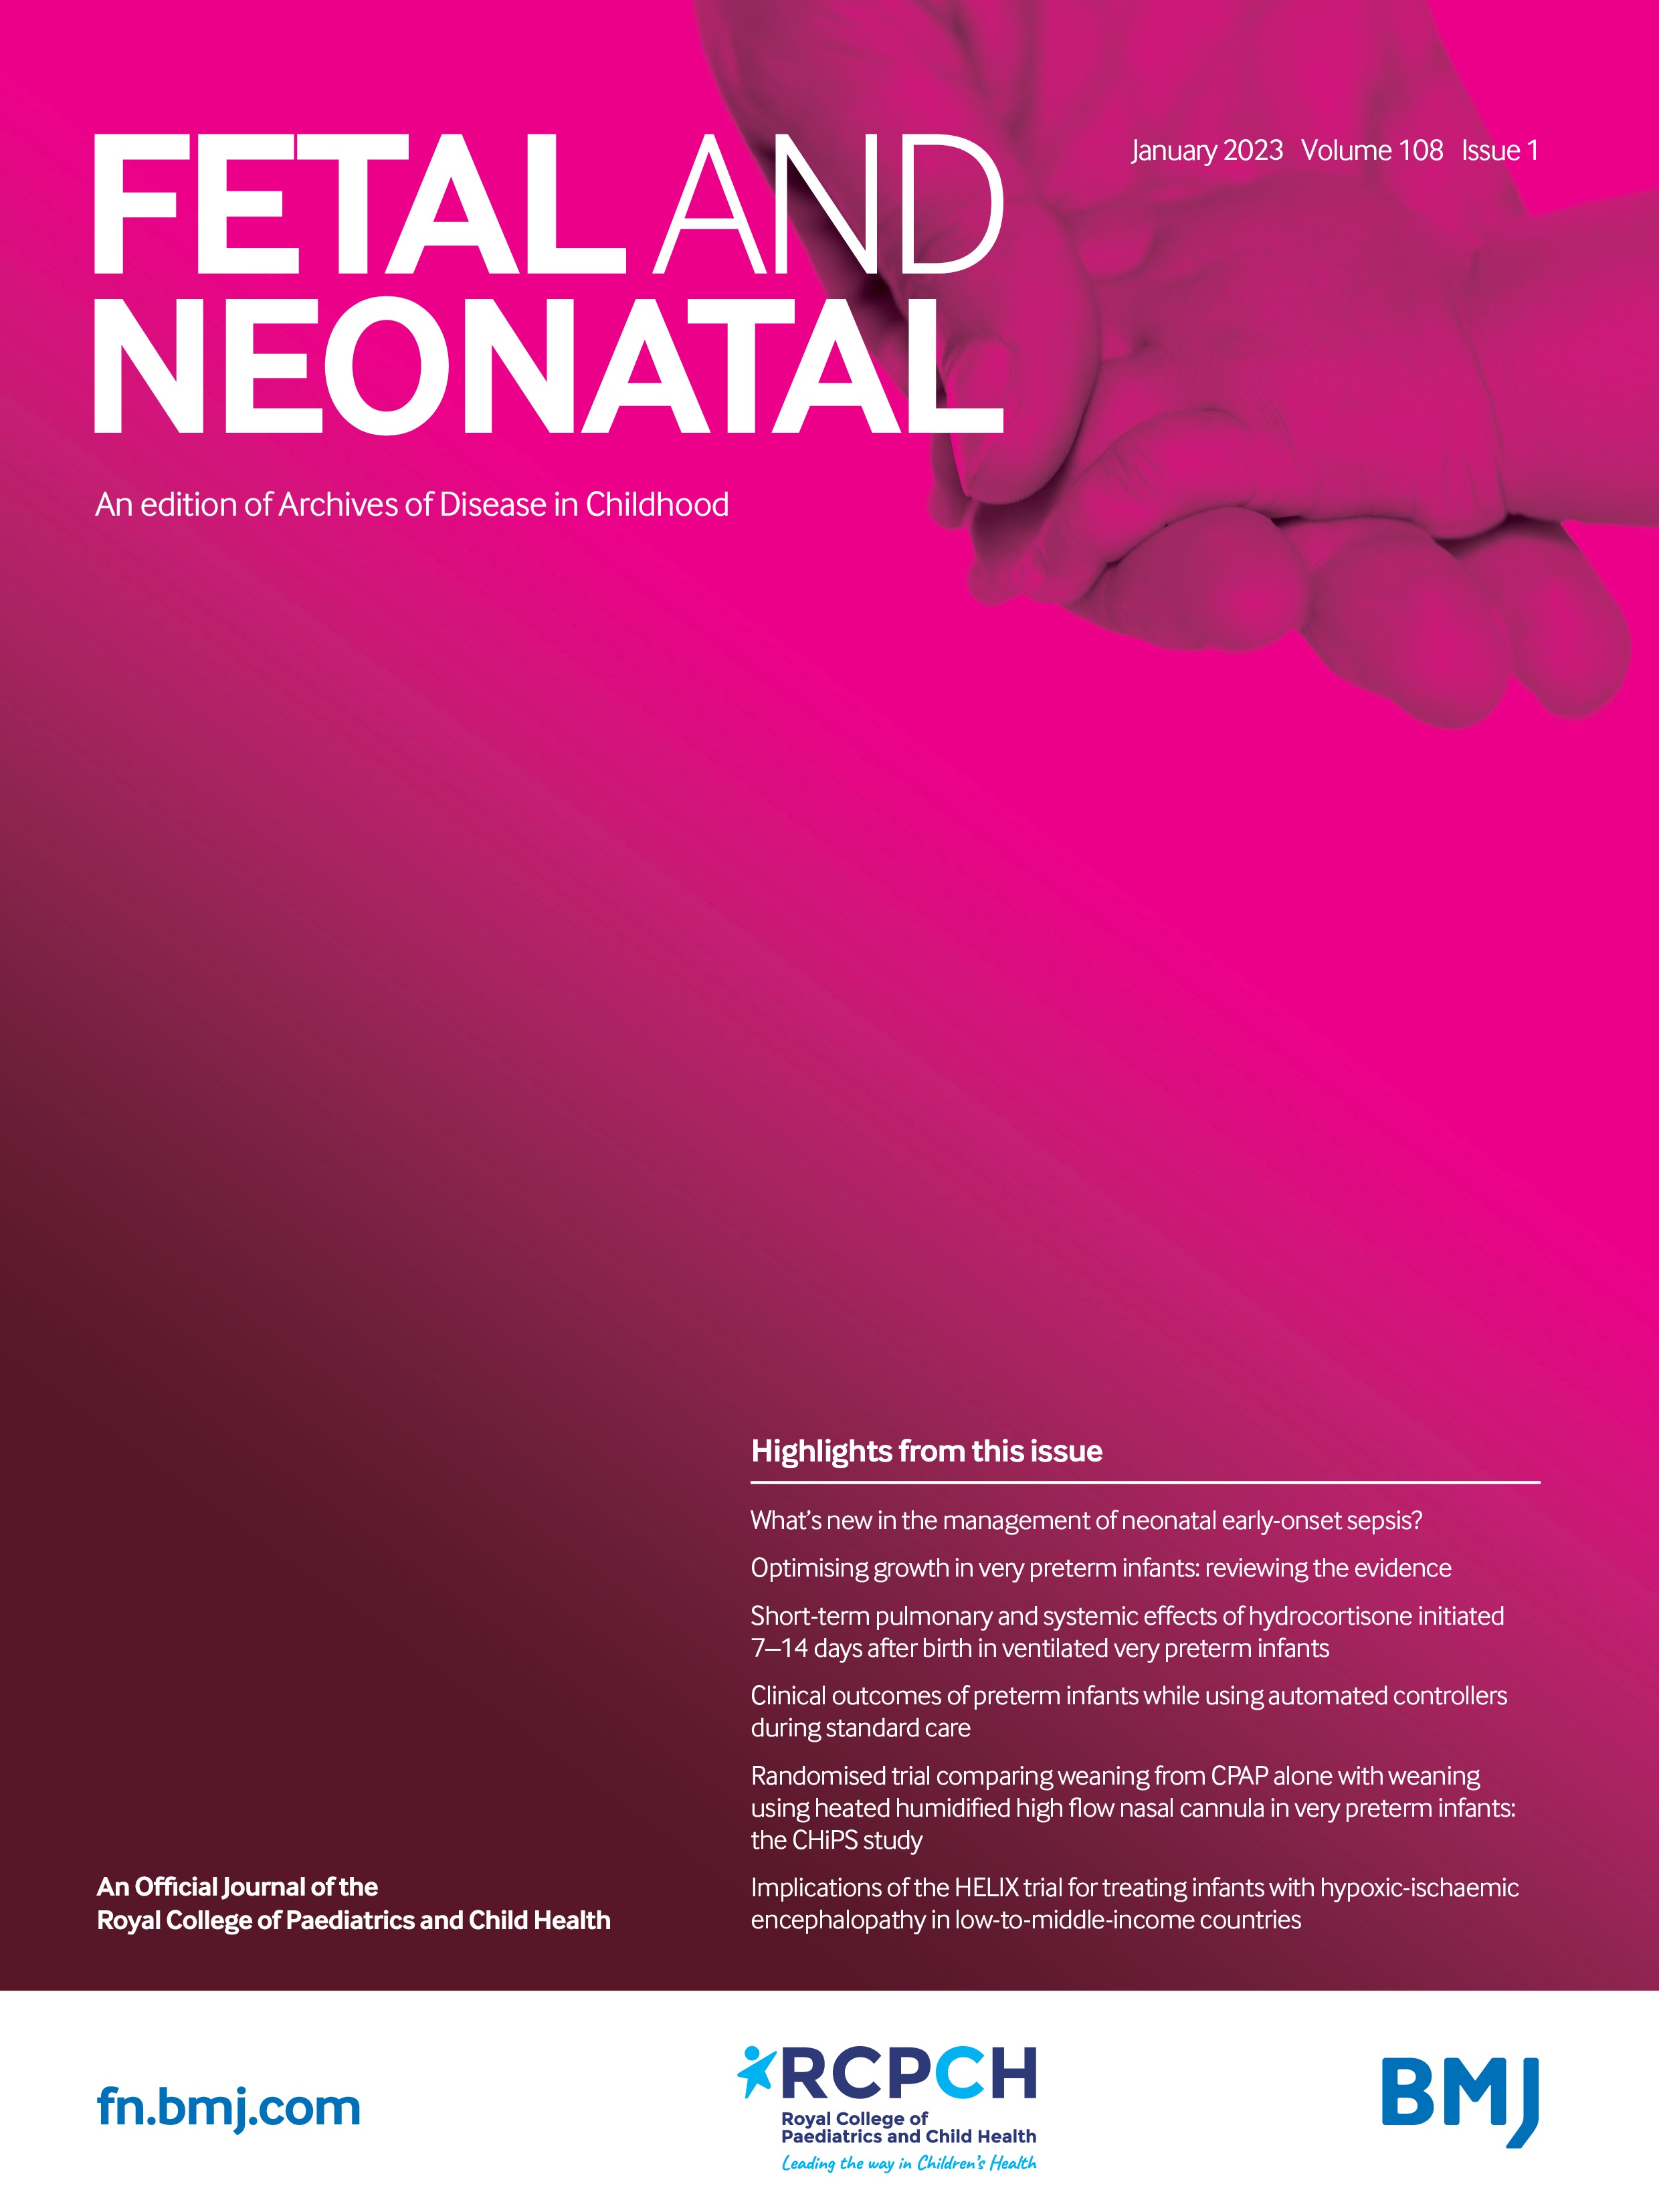 A randomised trial comparing weaning from CPAP alone with weaning using heated humidified high flow nasal cannula in very preterm infants: the CHiPS study